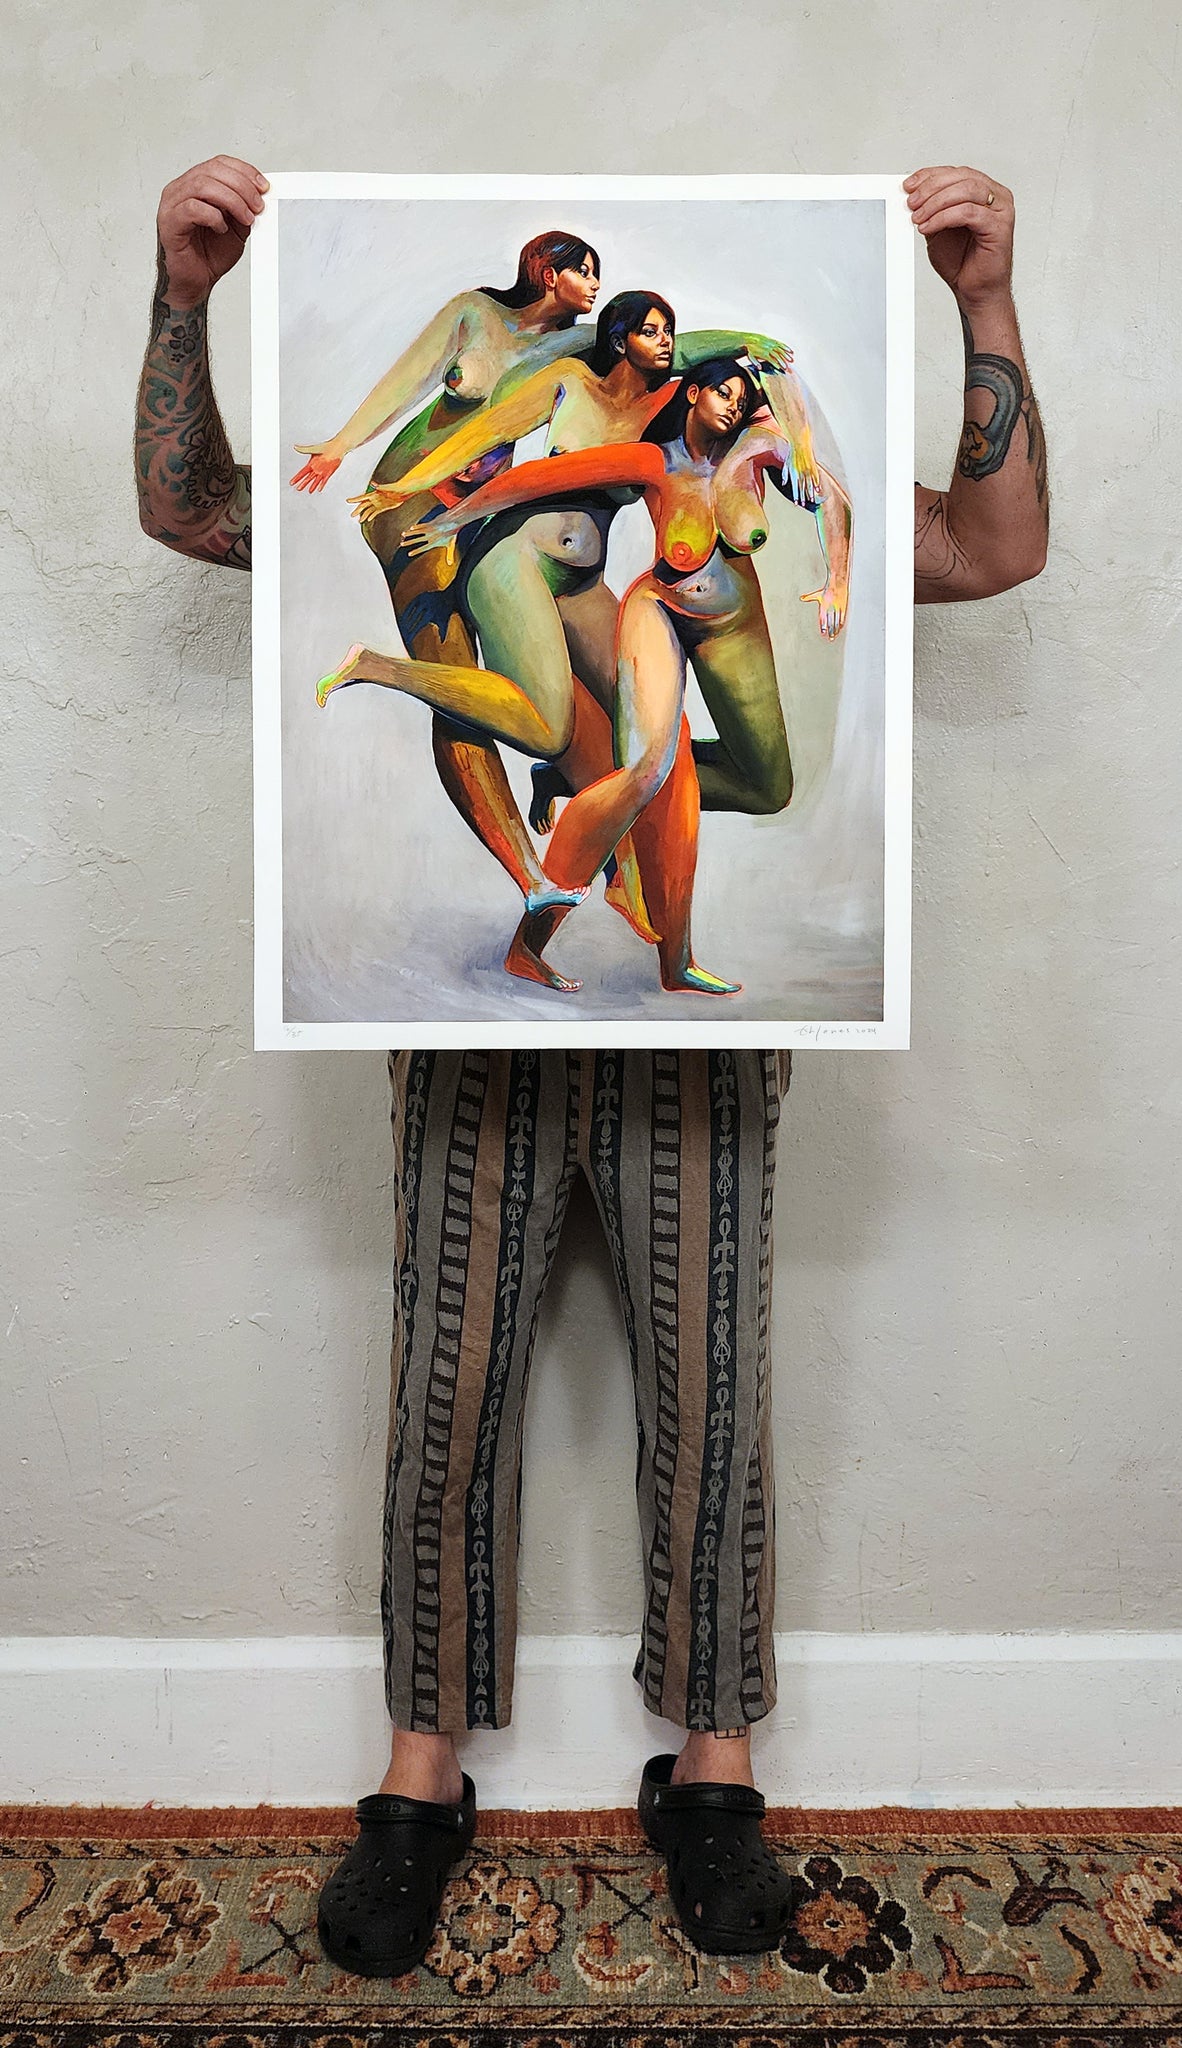 Erik Jones print of three nude figures with the same face and colorful bodies - print being held up by artist (man hidden behind print)